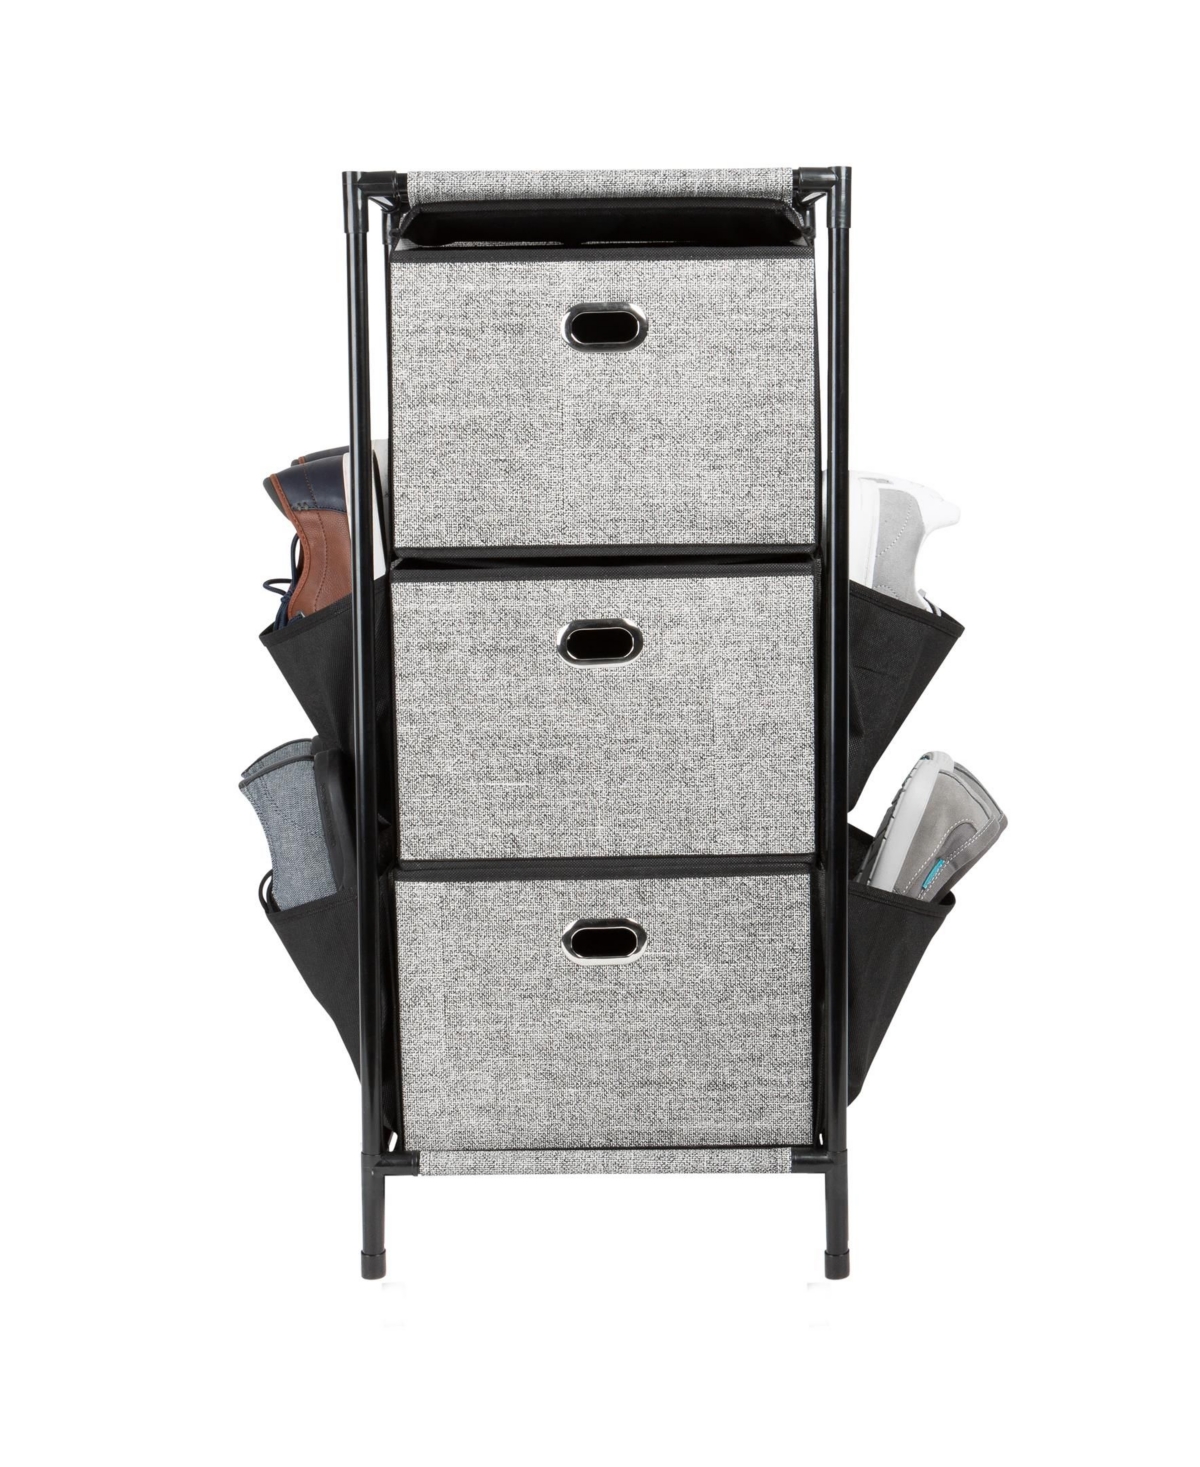 3 Tier Storage Drawers with Side Pockets - Black